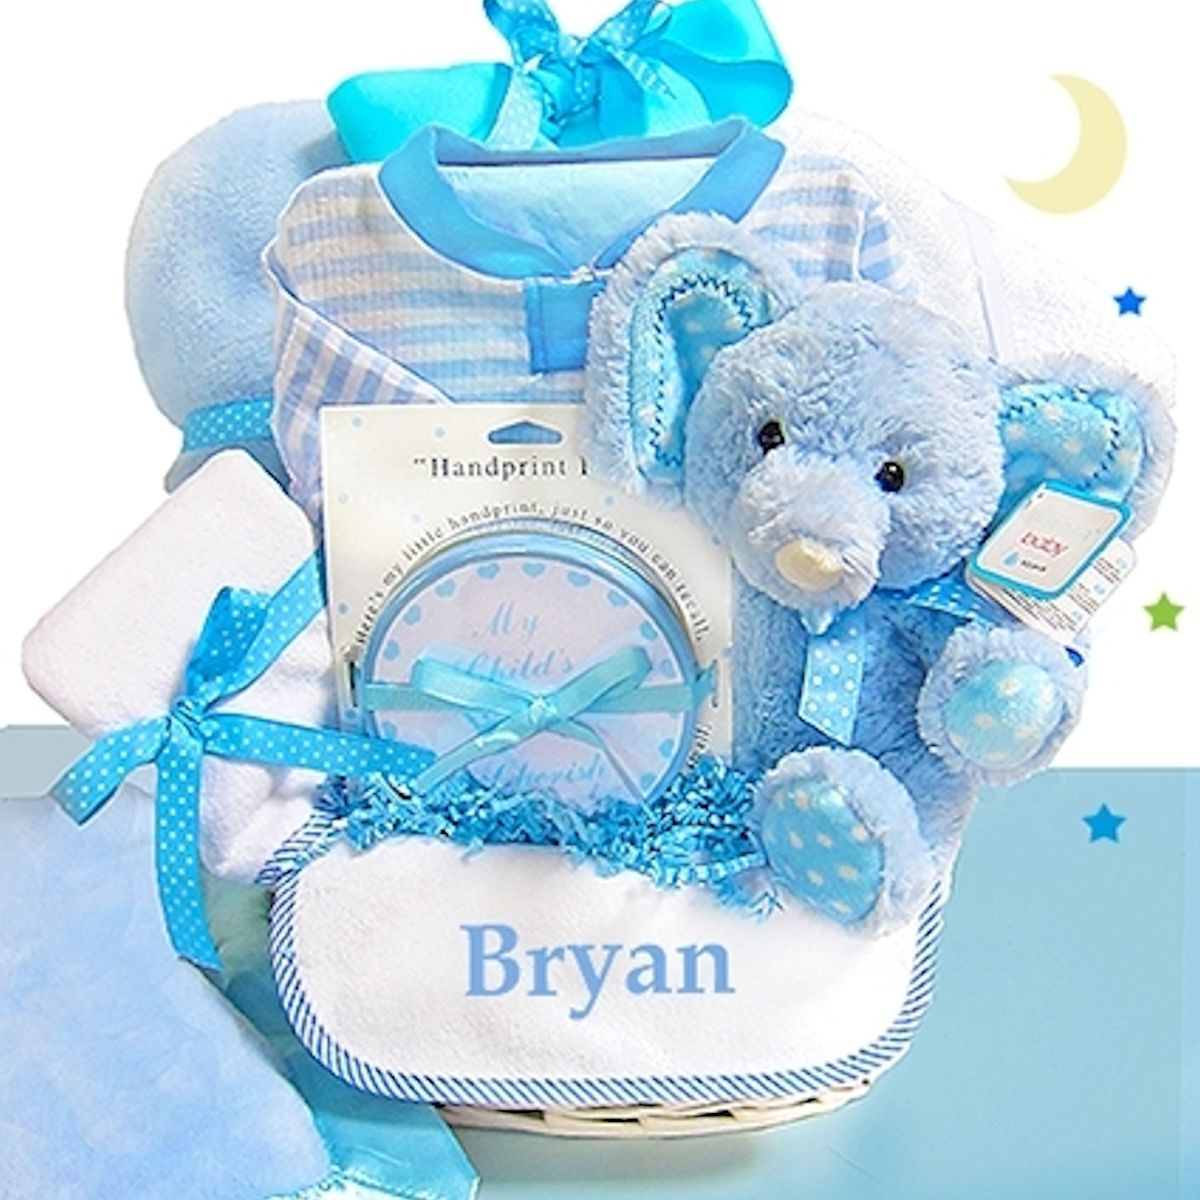 Personalized Gifts For Baby Boy New Baby Boy Gift Basket Blue Elephant Of Personalized Gifts For Baby Boy 